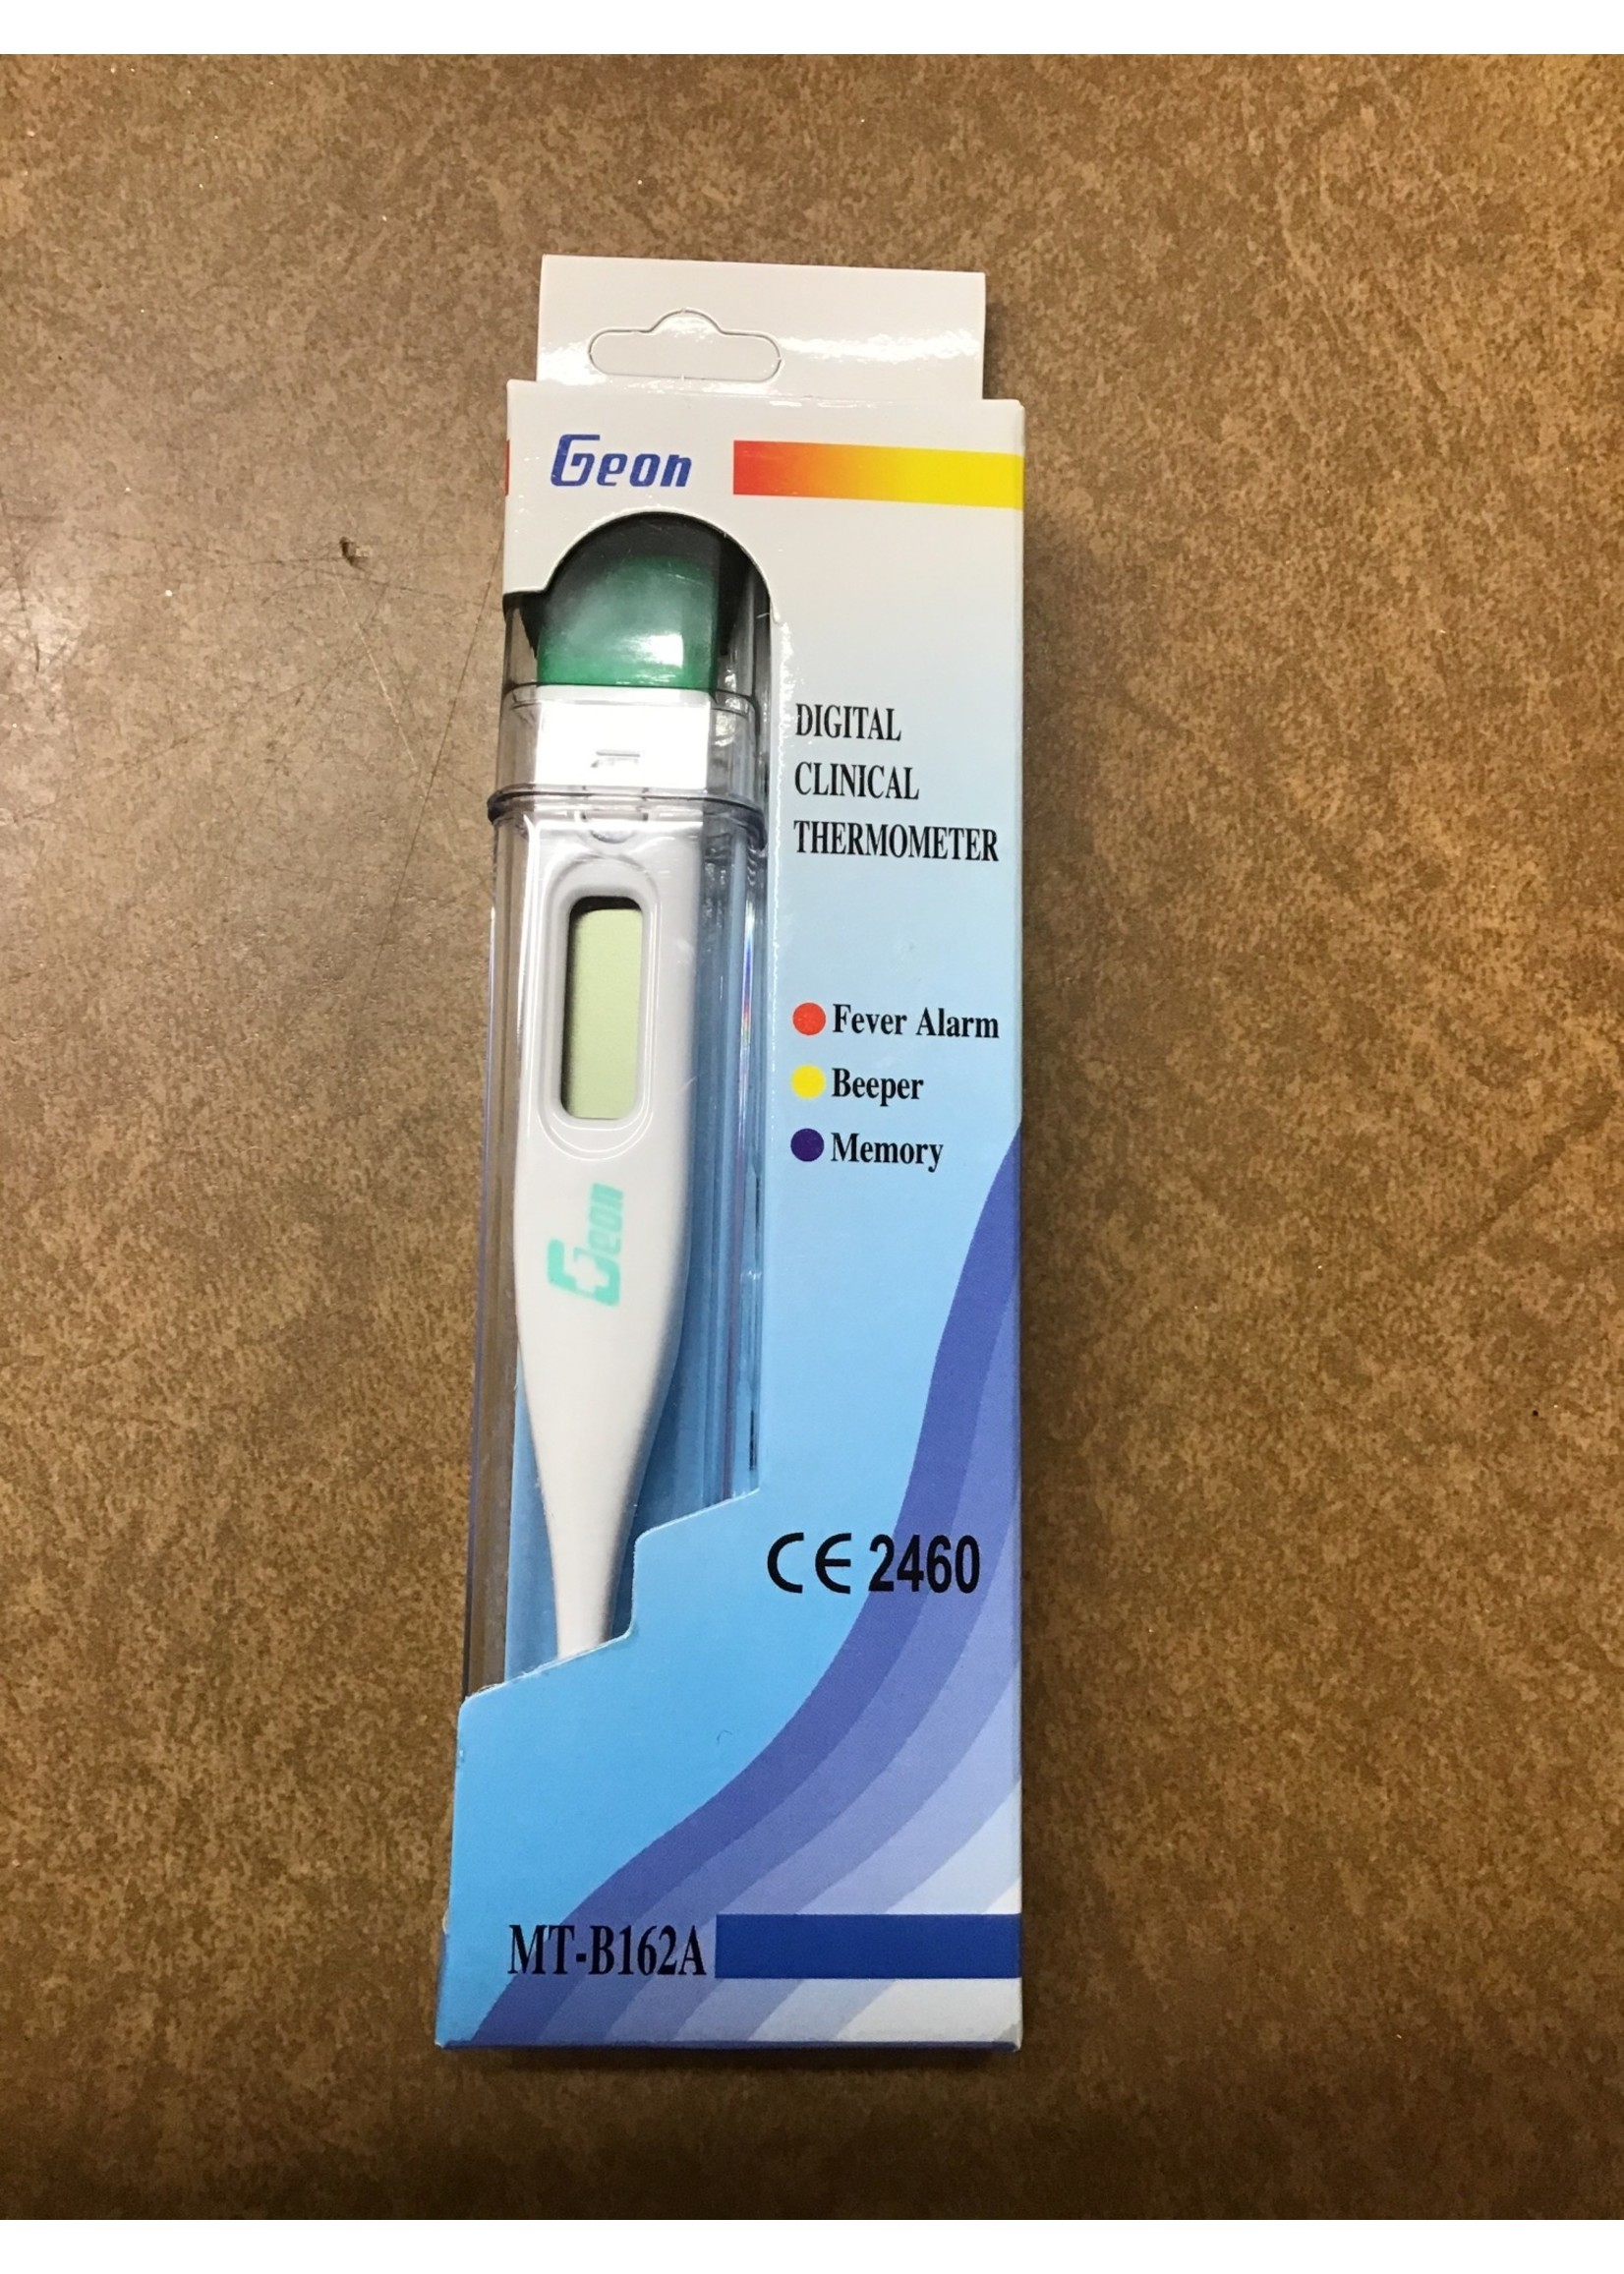 Geon Digital Thermometer